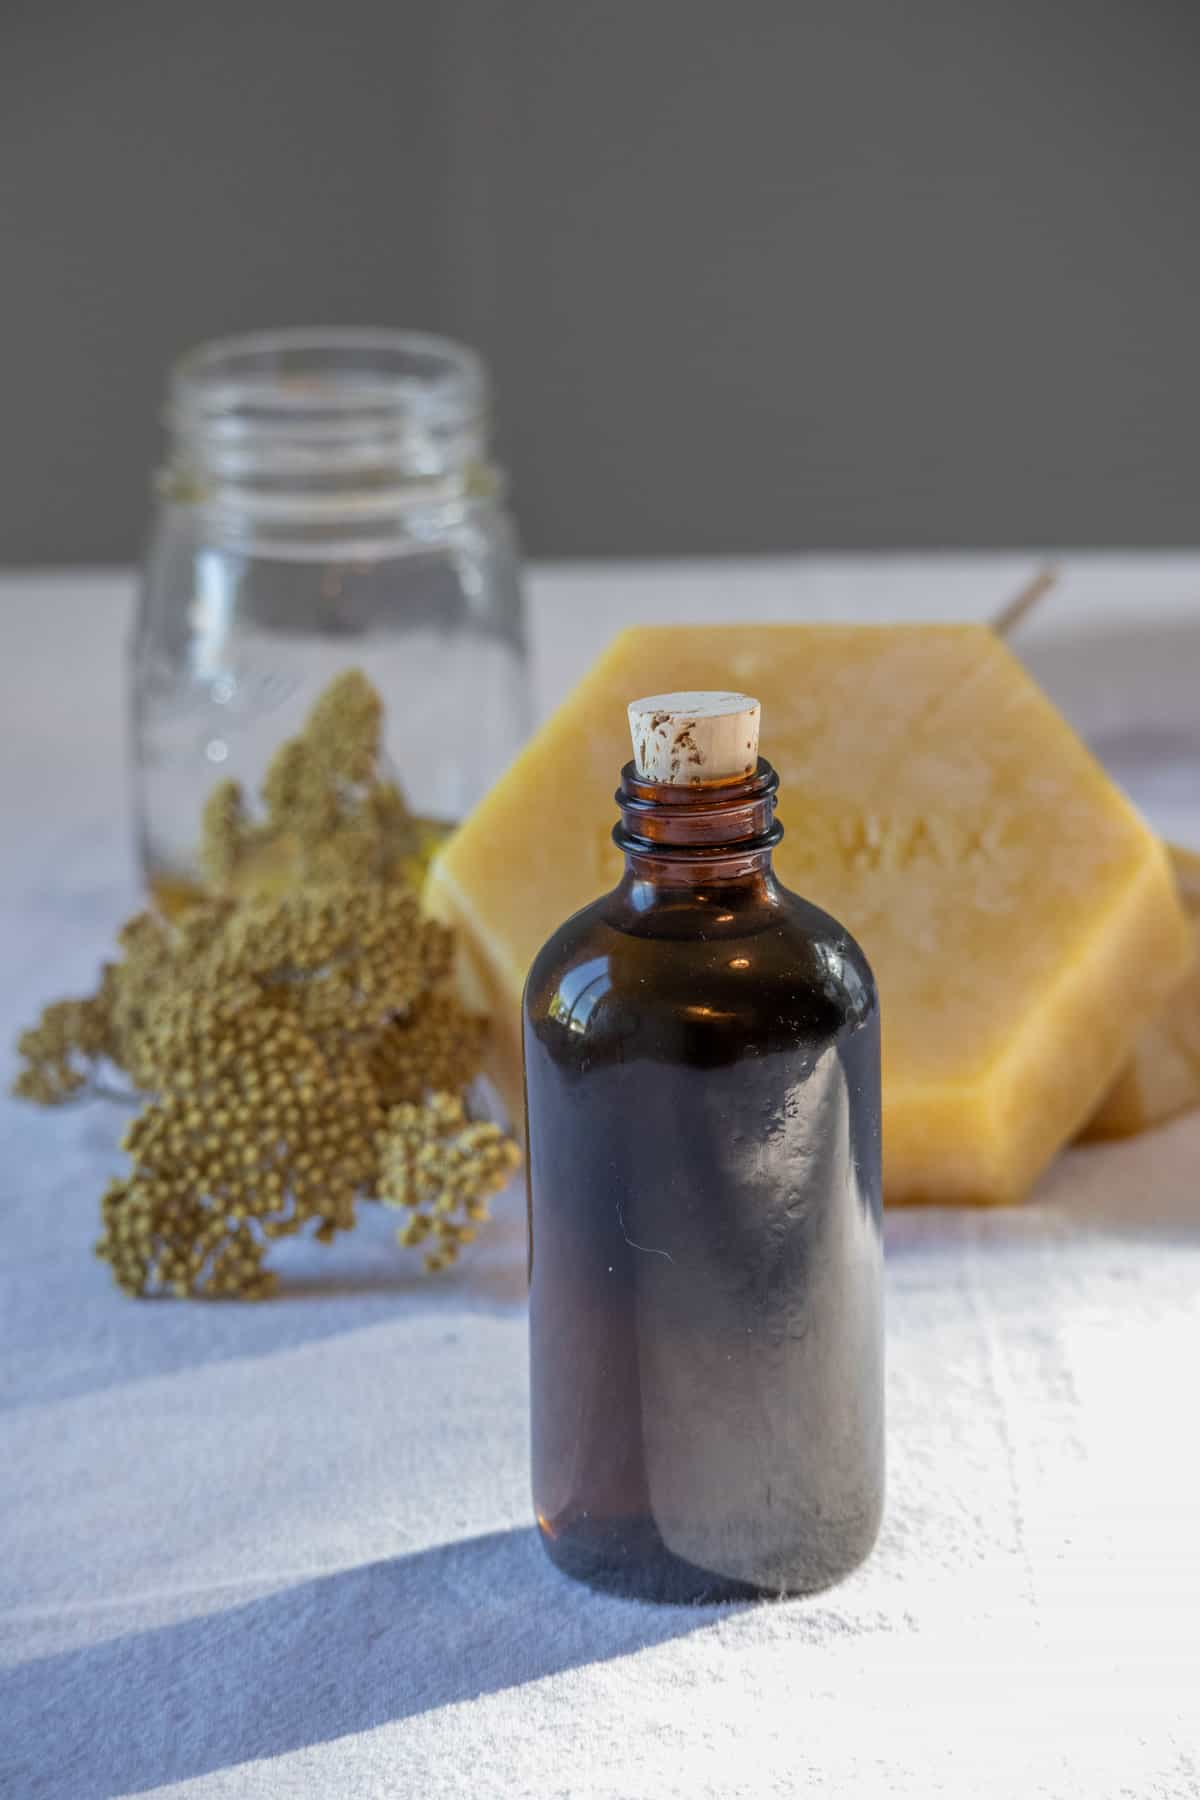 An apothecary bottle of infused yarrow oil